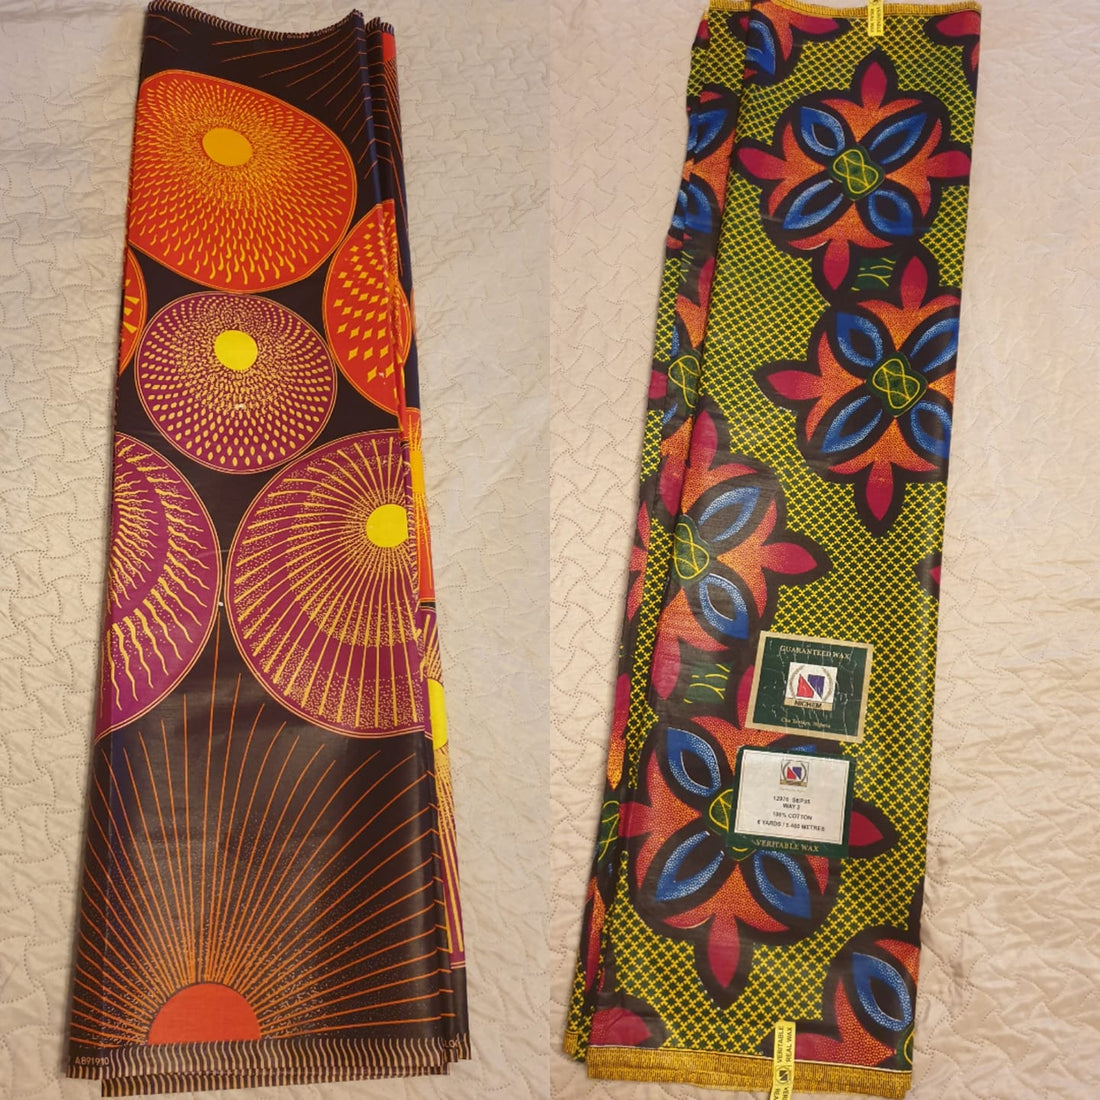 ORIGINAL AFRICAN WAX PRINT FABRIC - HOW TO TELL THE DIFFERENCE